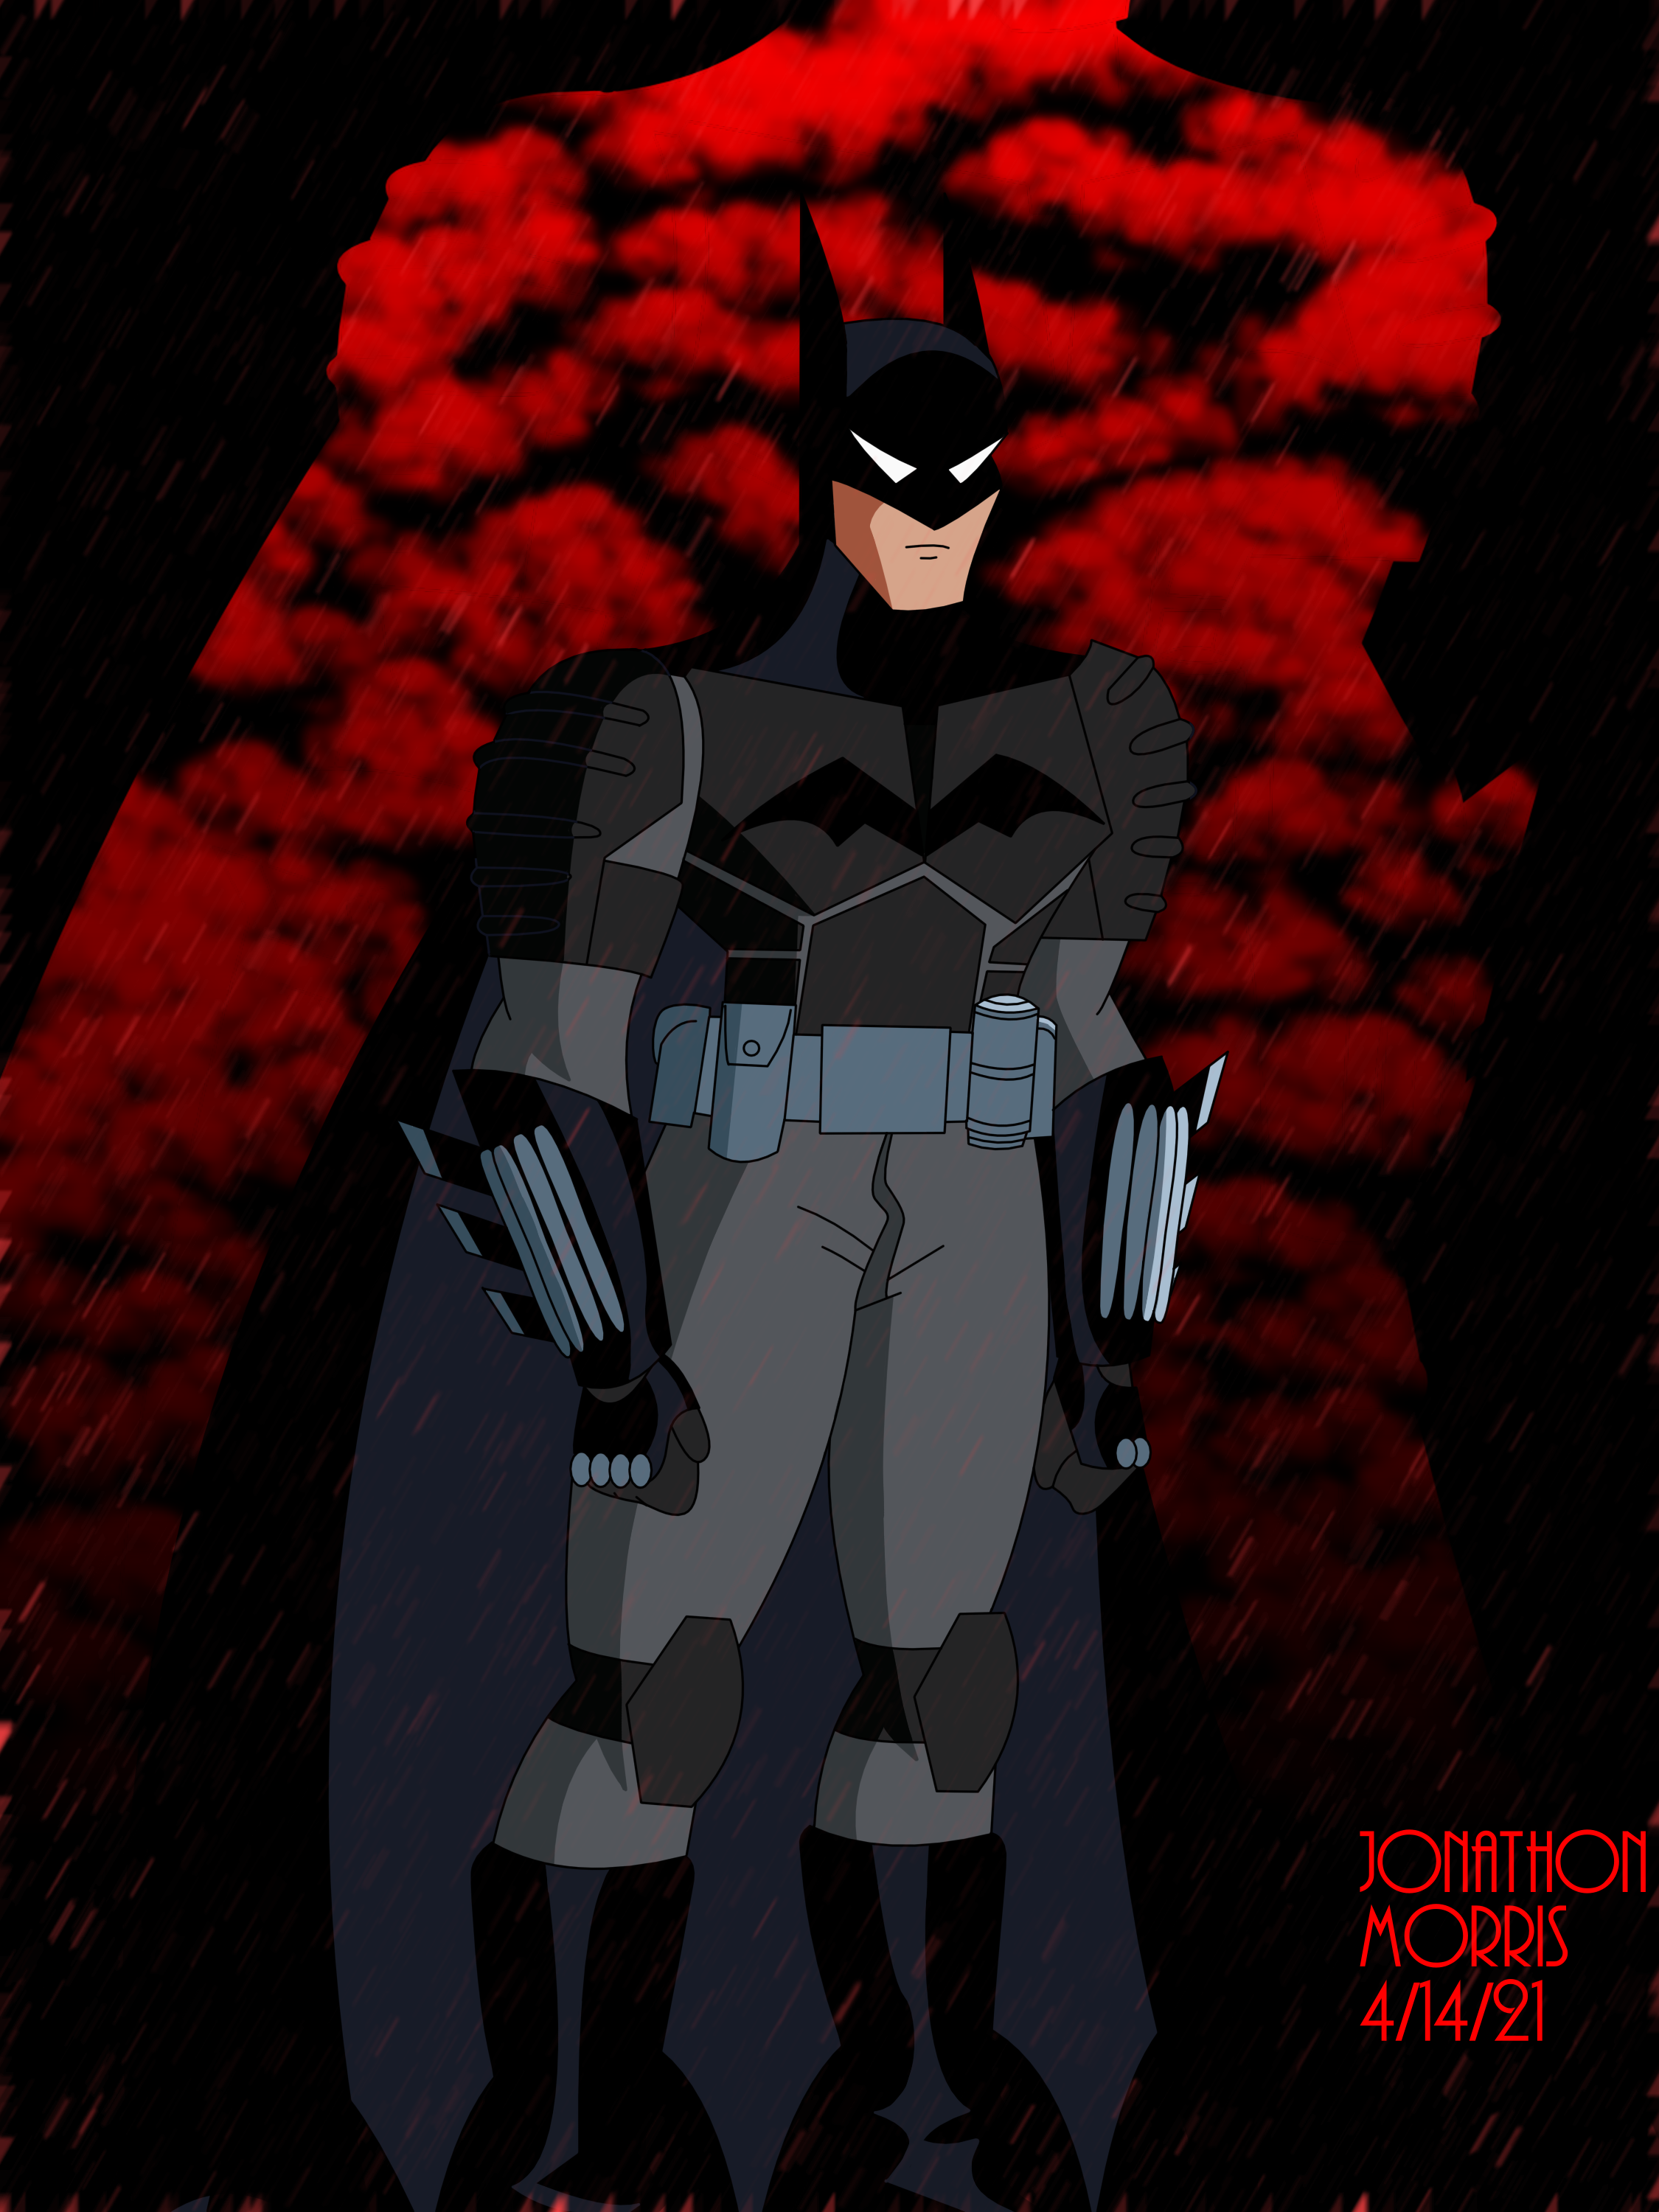 The Batman Animated Series Style by JAM4077 on DeviantArt